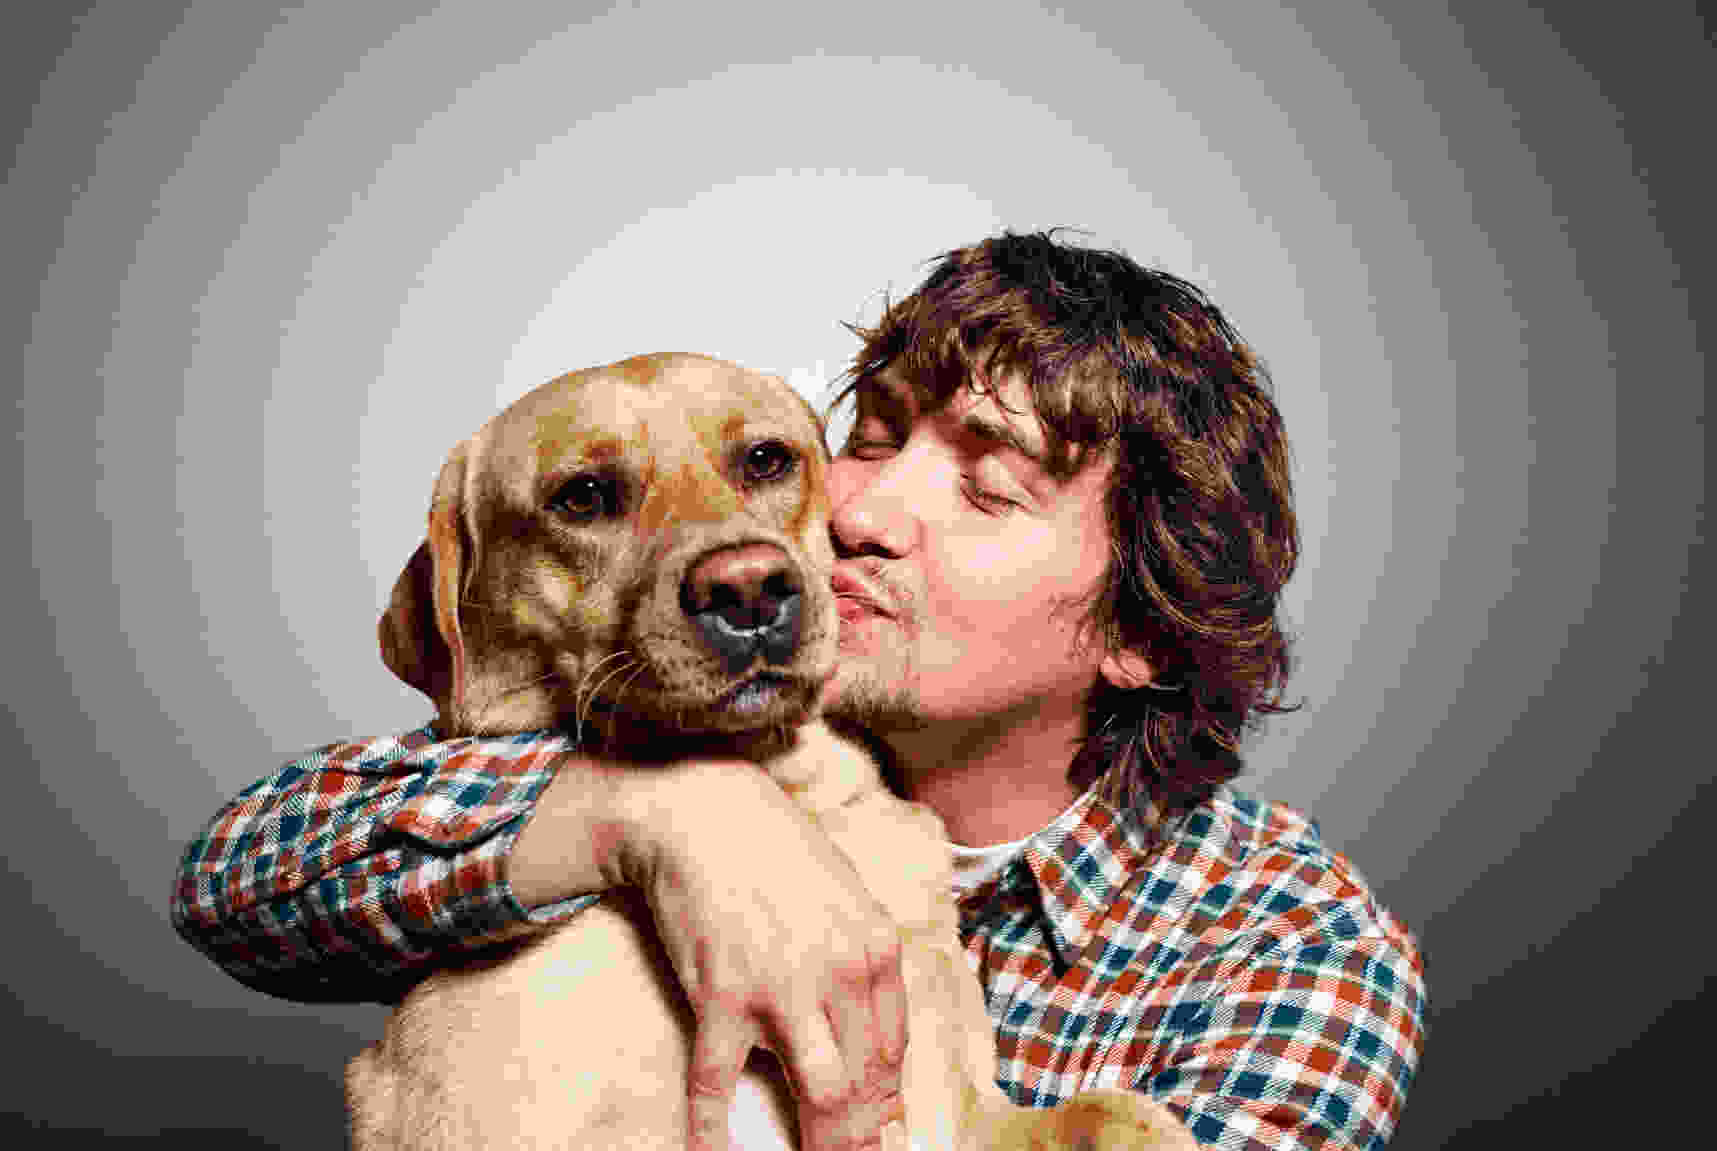 blurry compressed image of man kissing dog